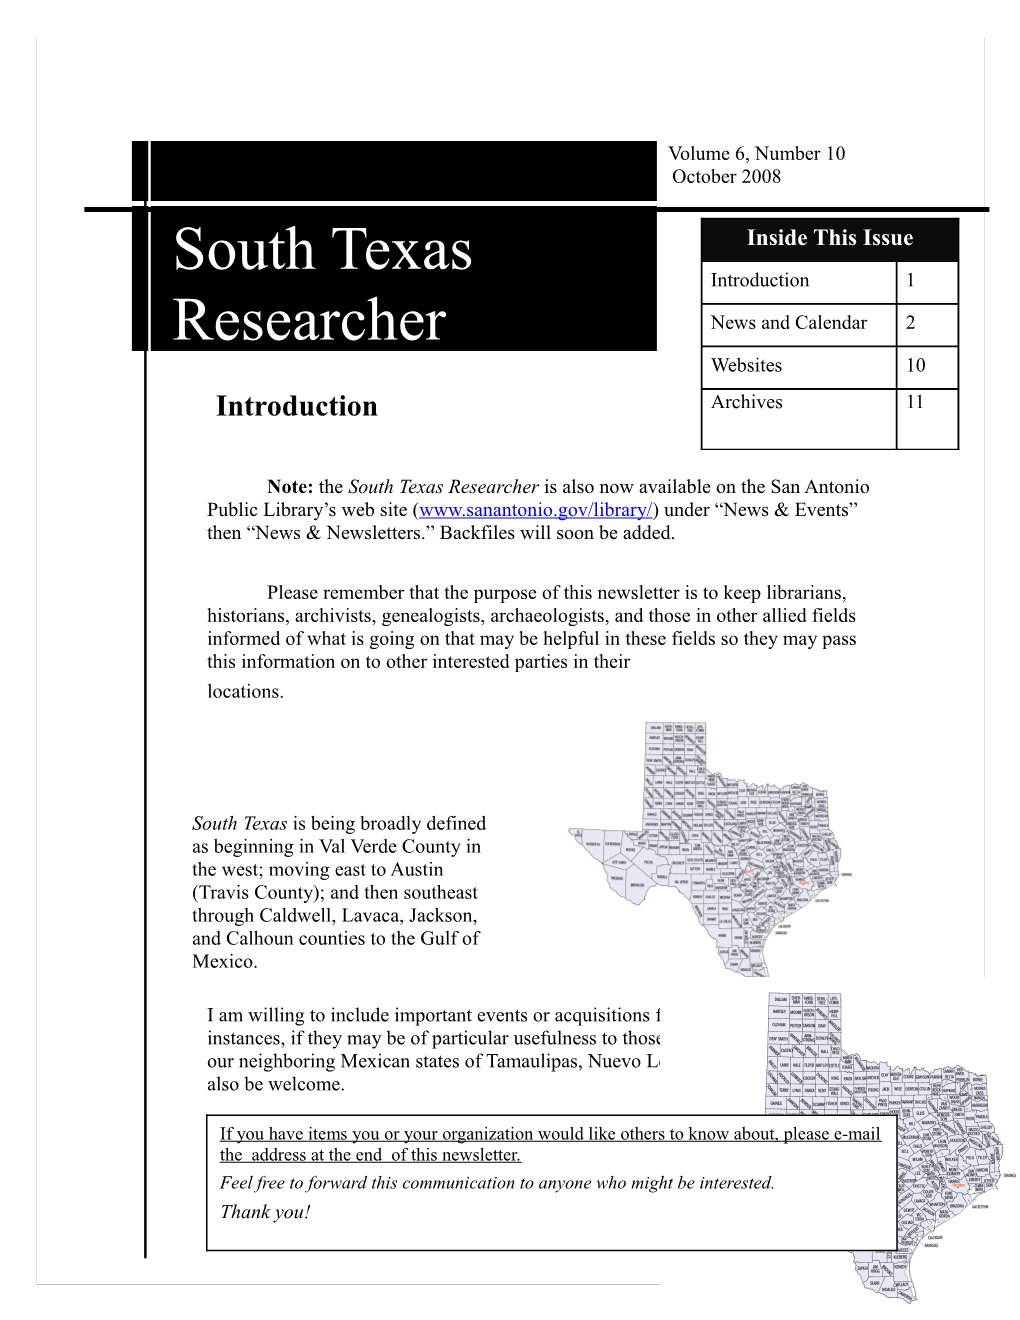 Note: the South Texas Researcher Is Also Now Available on the San Antonio Public Library s1